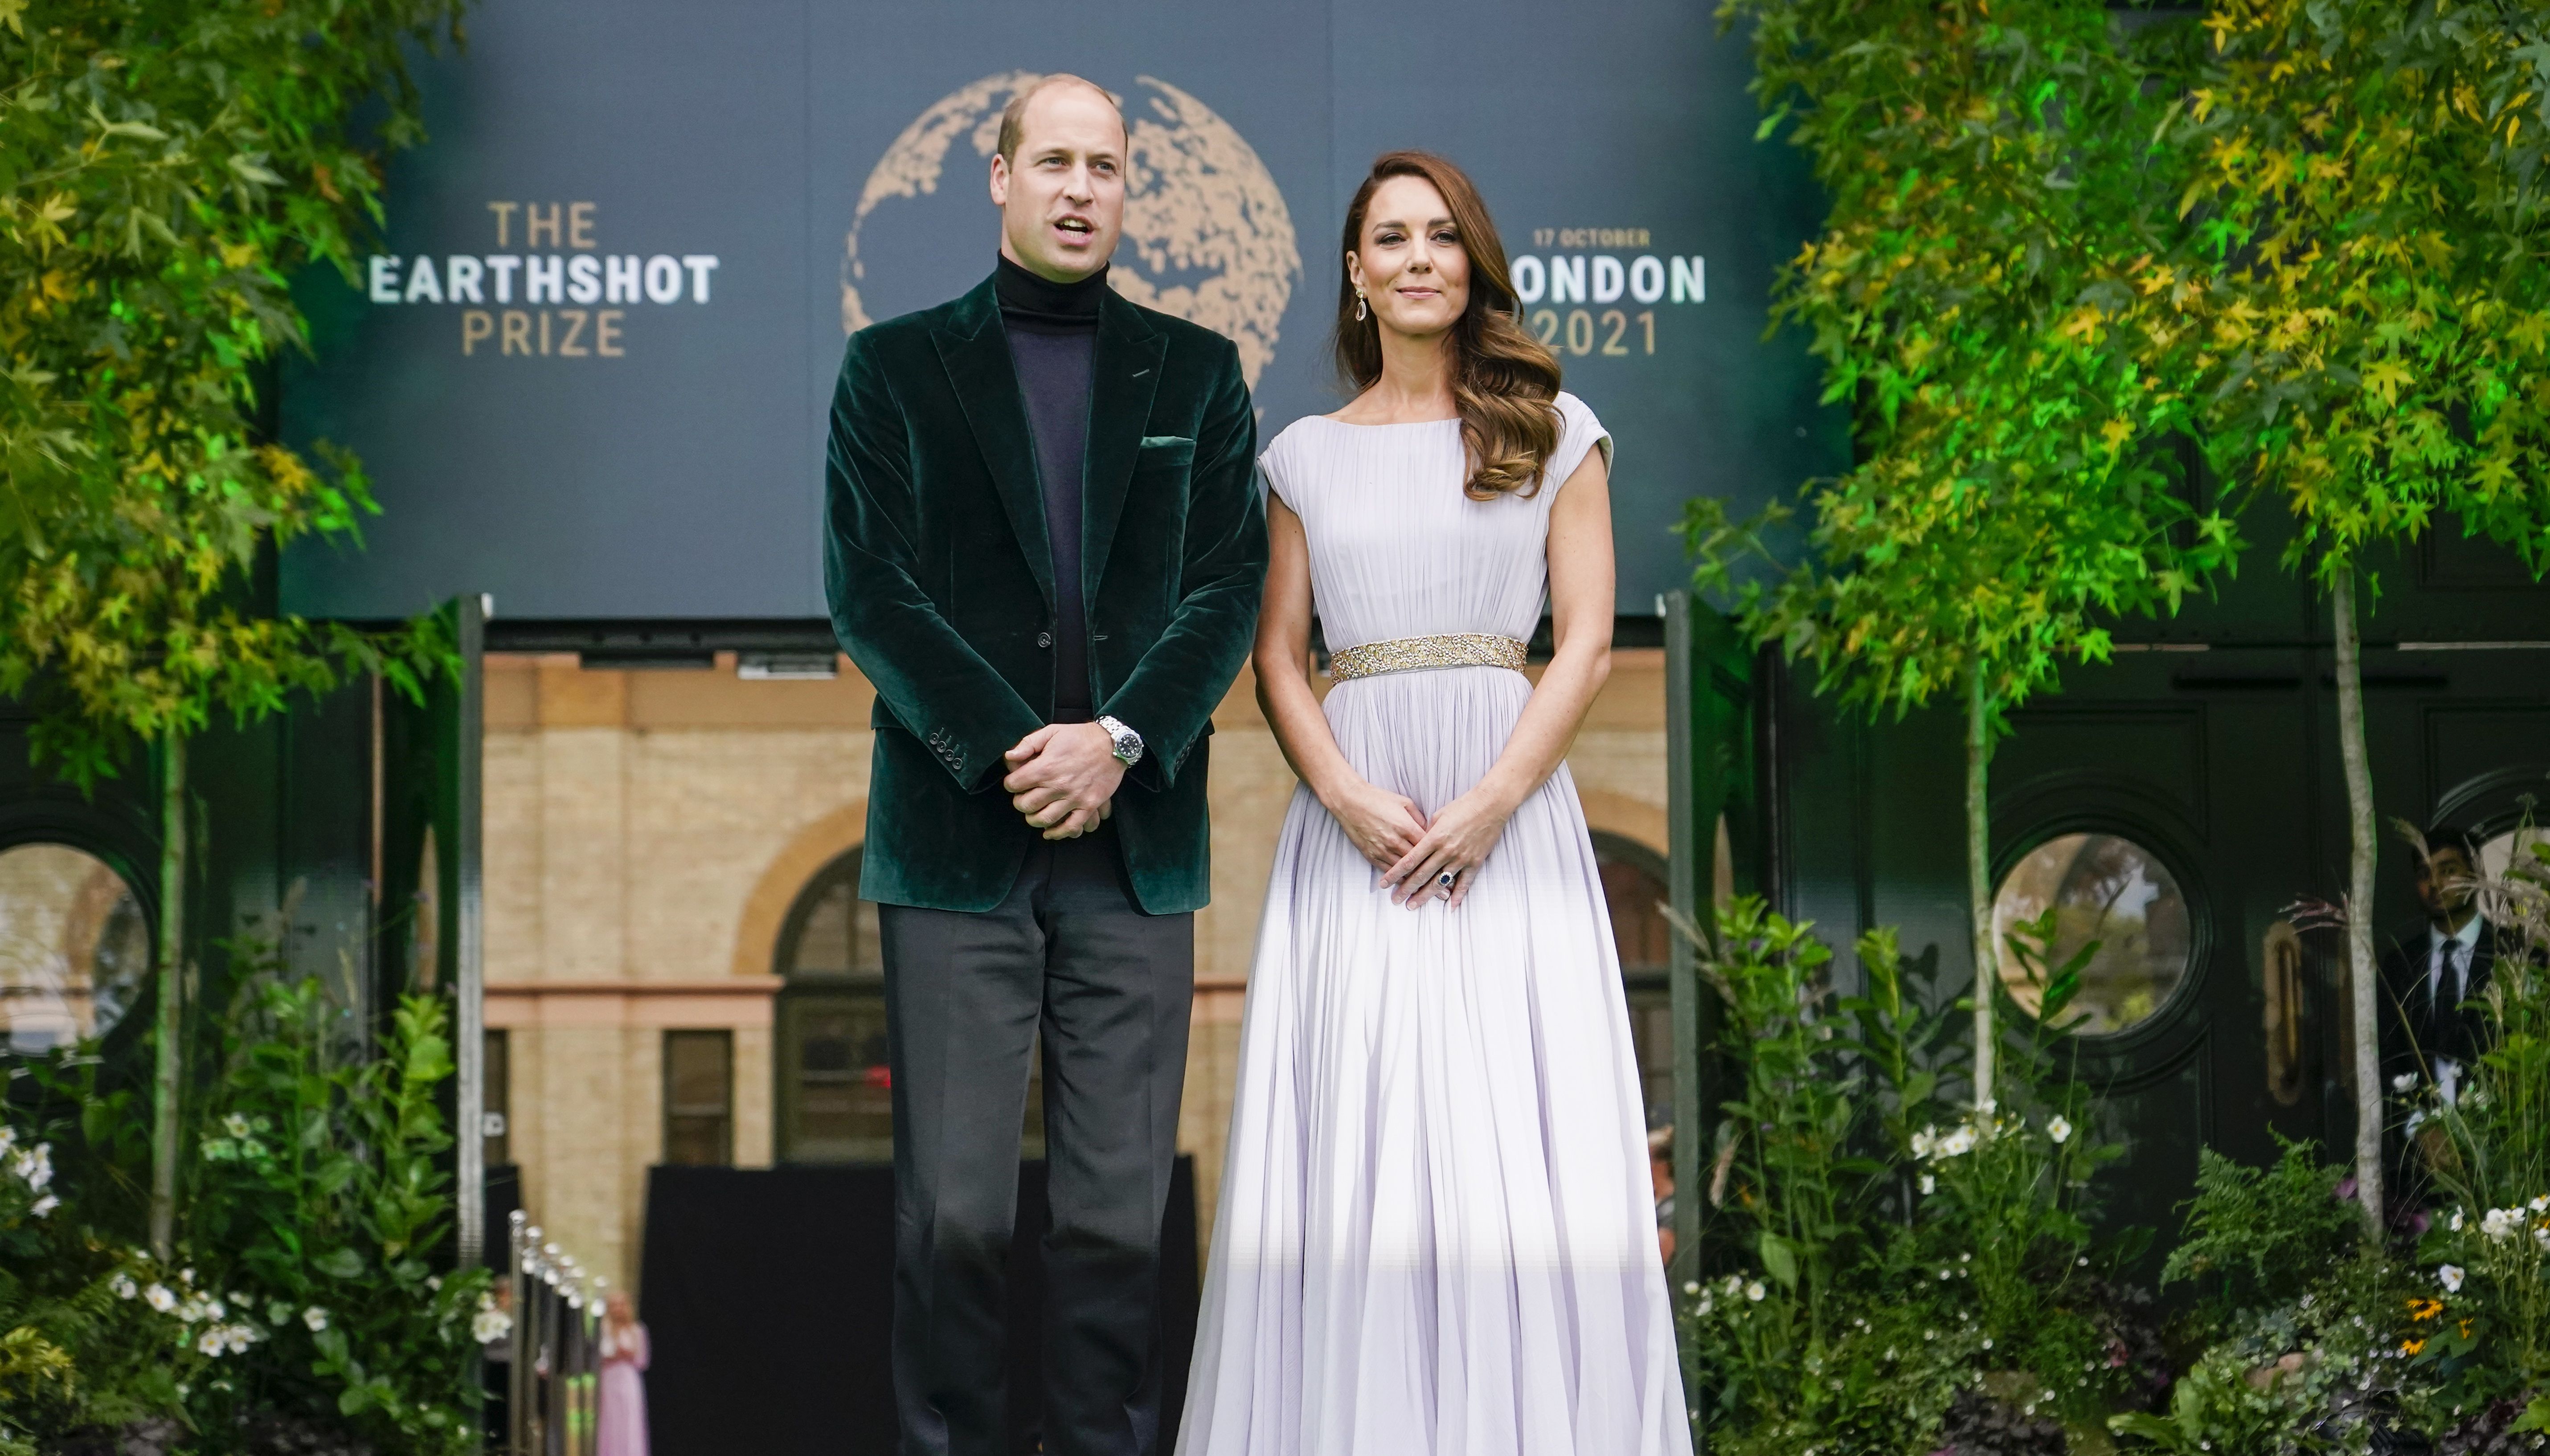 The Duke and Duchess of Cambridge arriving for the first Earthshot Prize awards ceremony at Alexandra Palace in London. They are expected to travel to the USA in December.